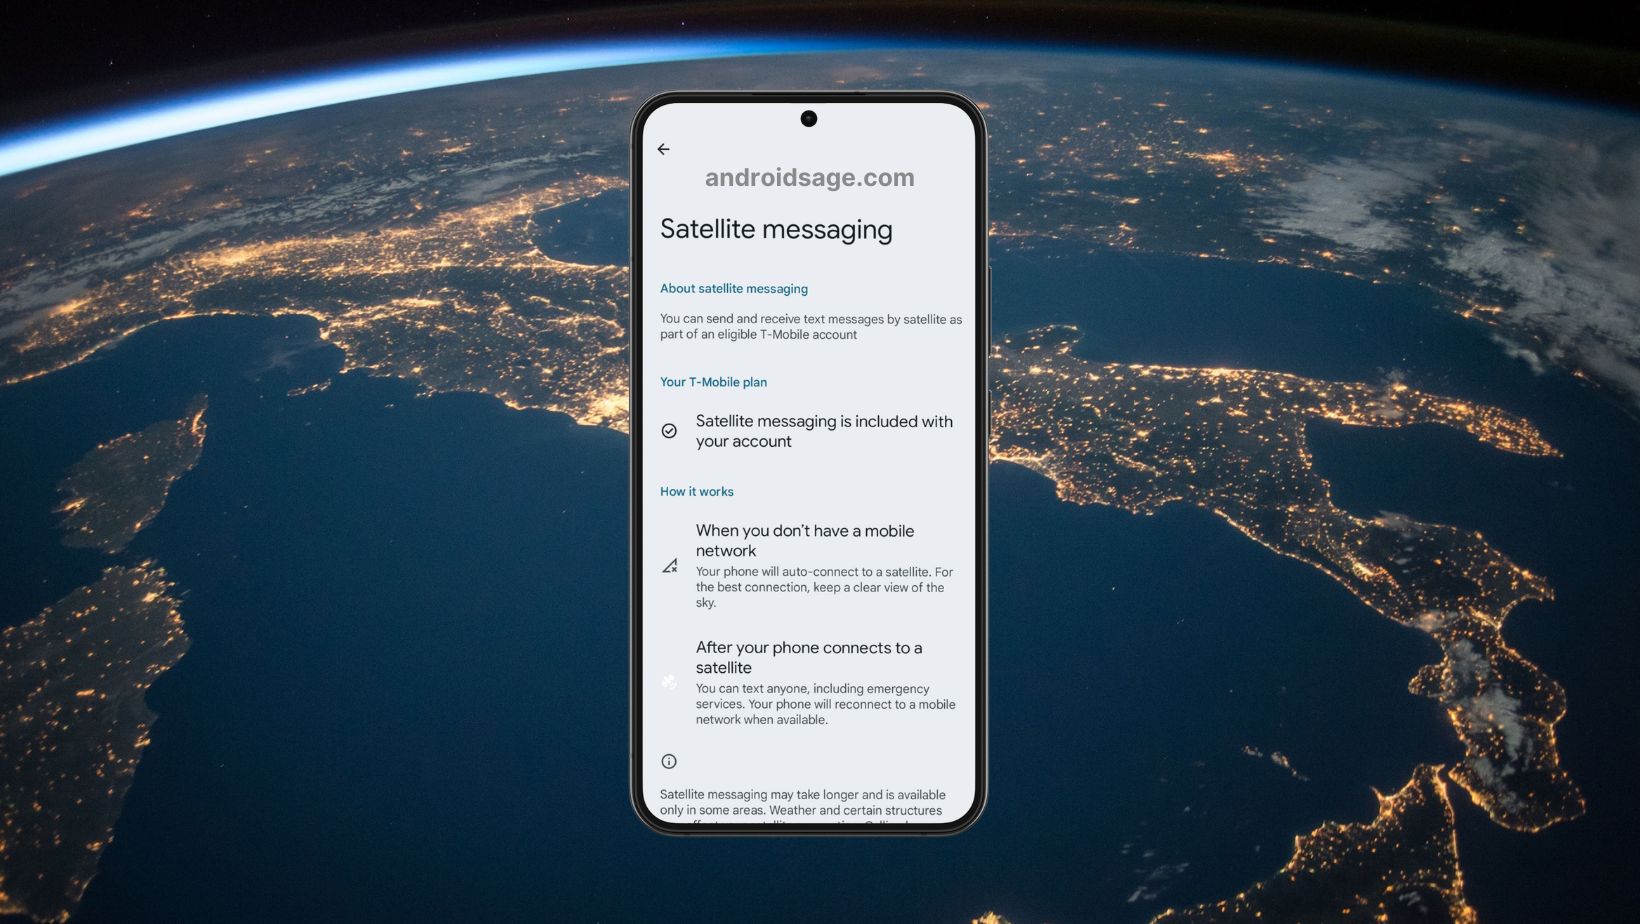 Google Satellite messaging on Android 15 androidsage.com